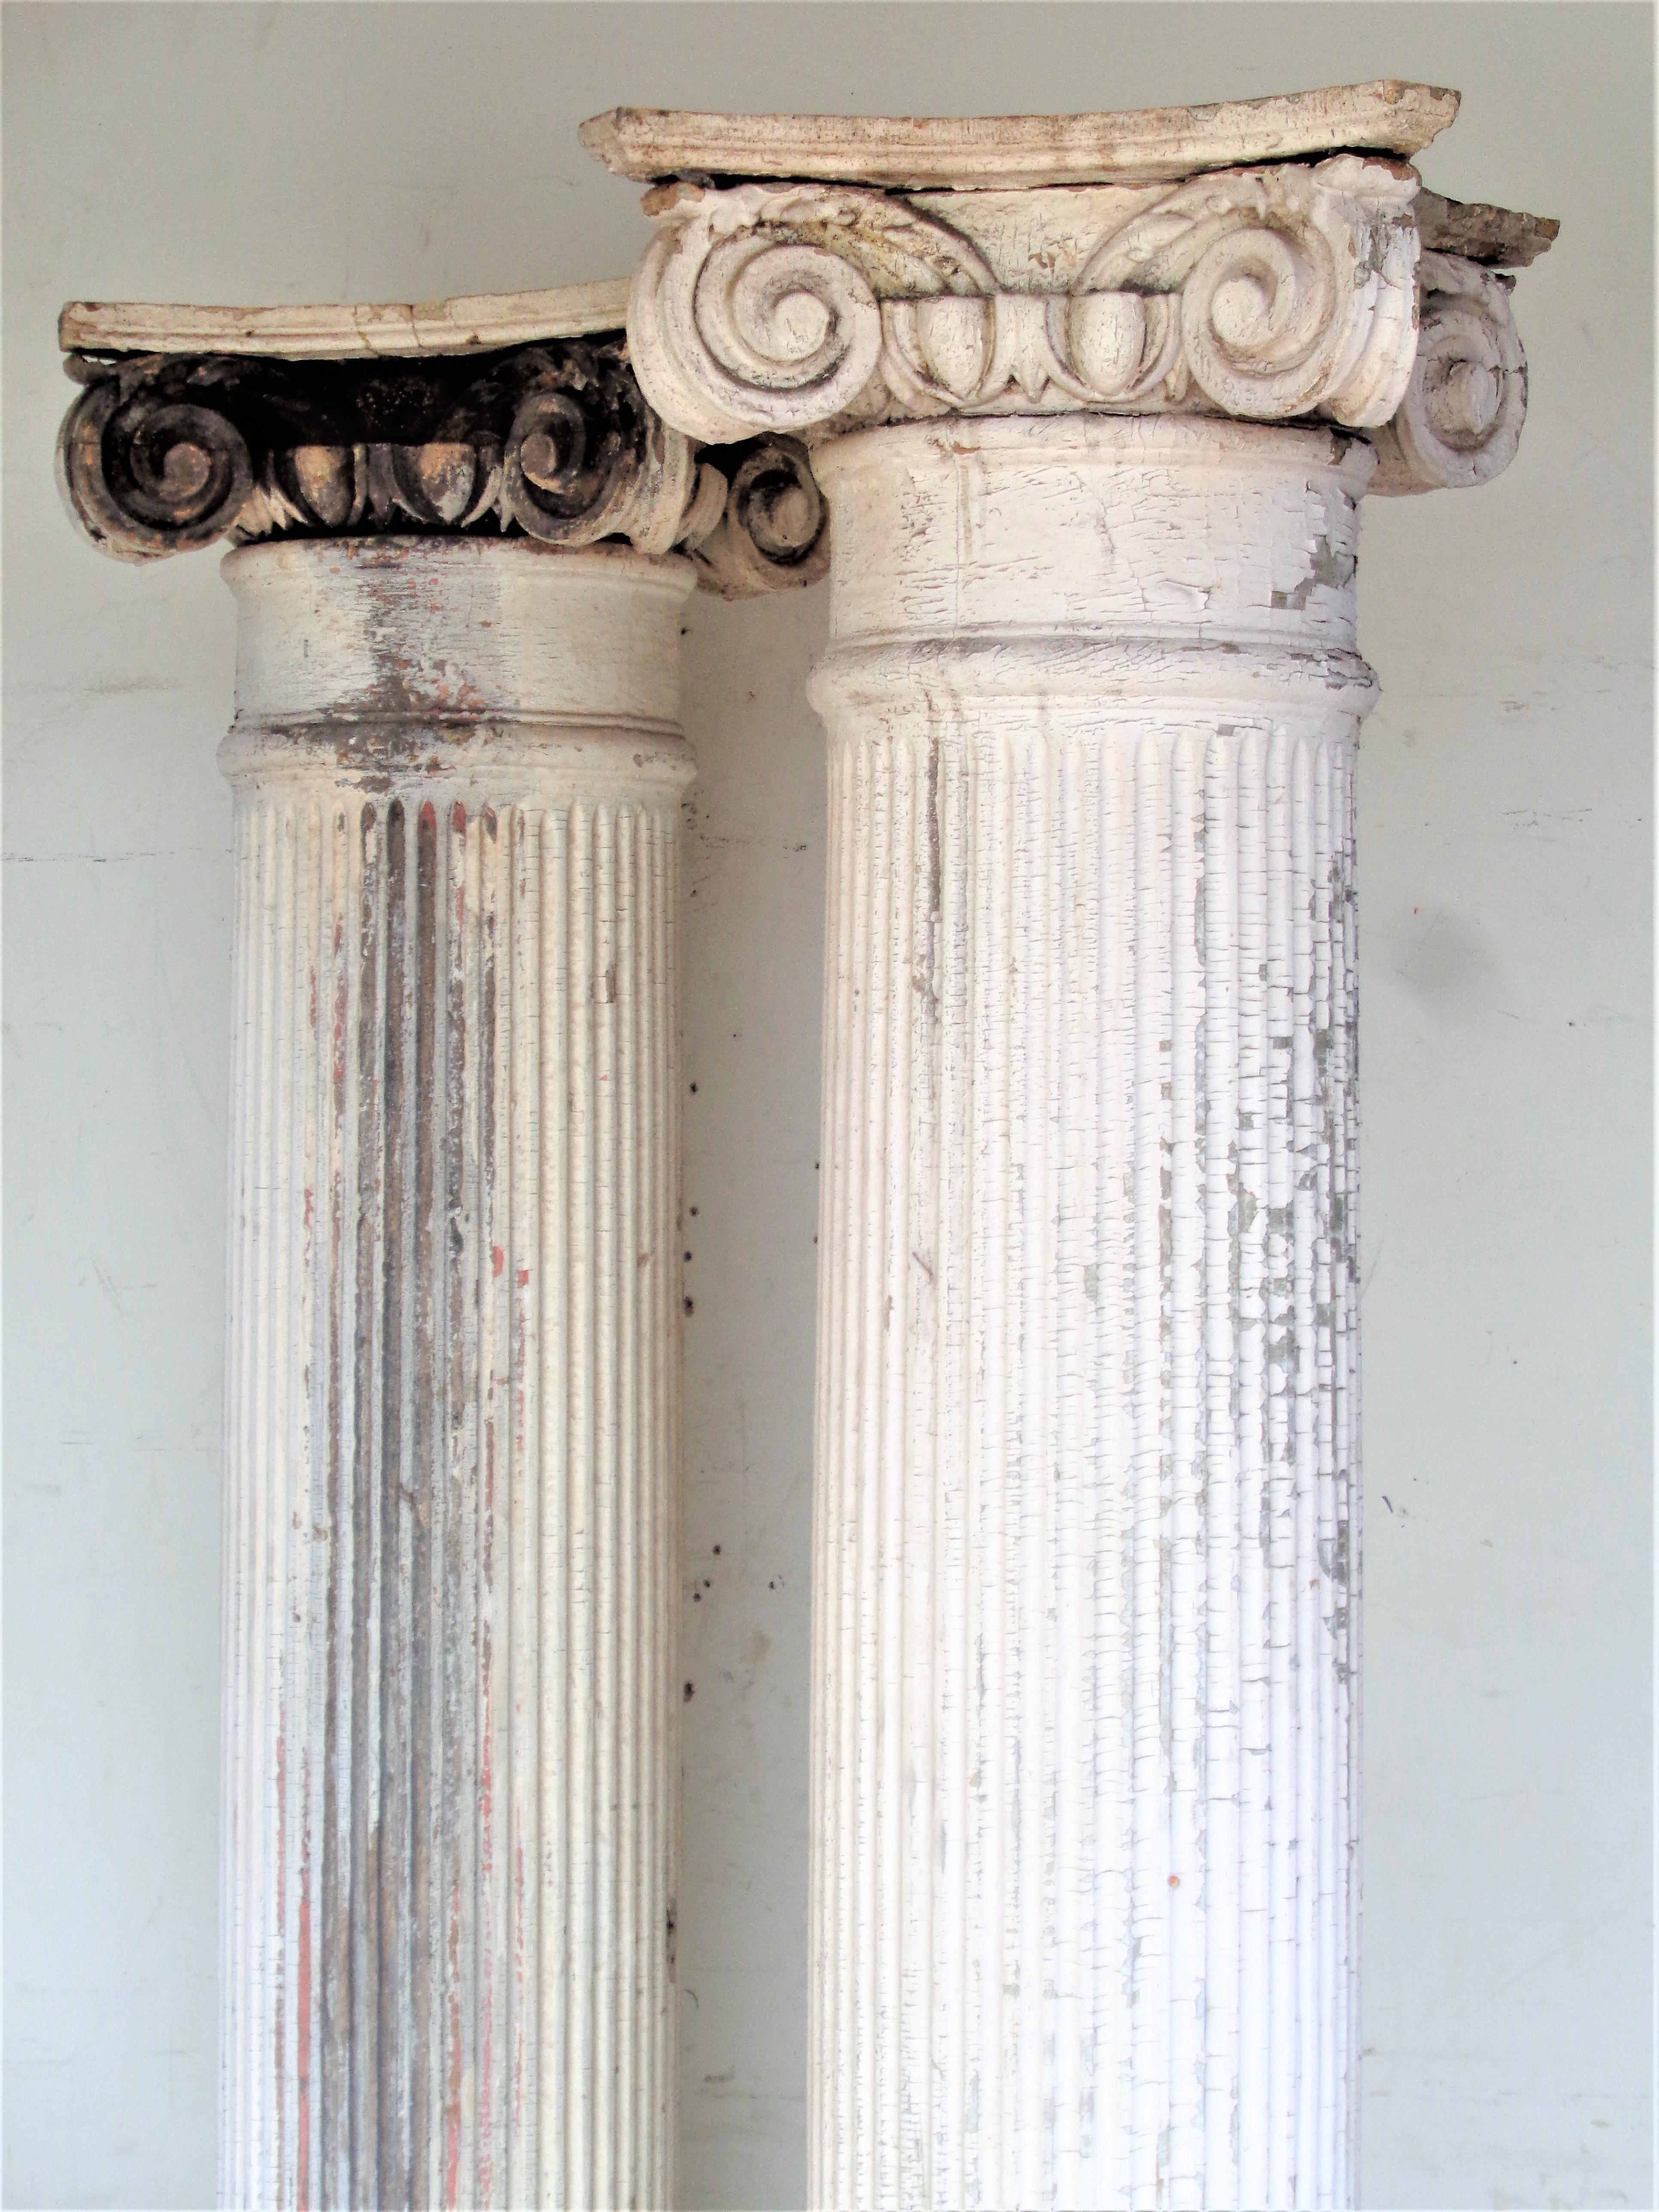 19th C. American Architectural Fluted Columns w/ Ionic Capitals 4